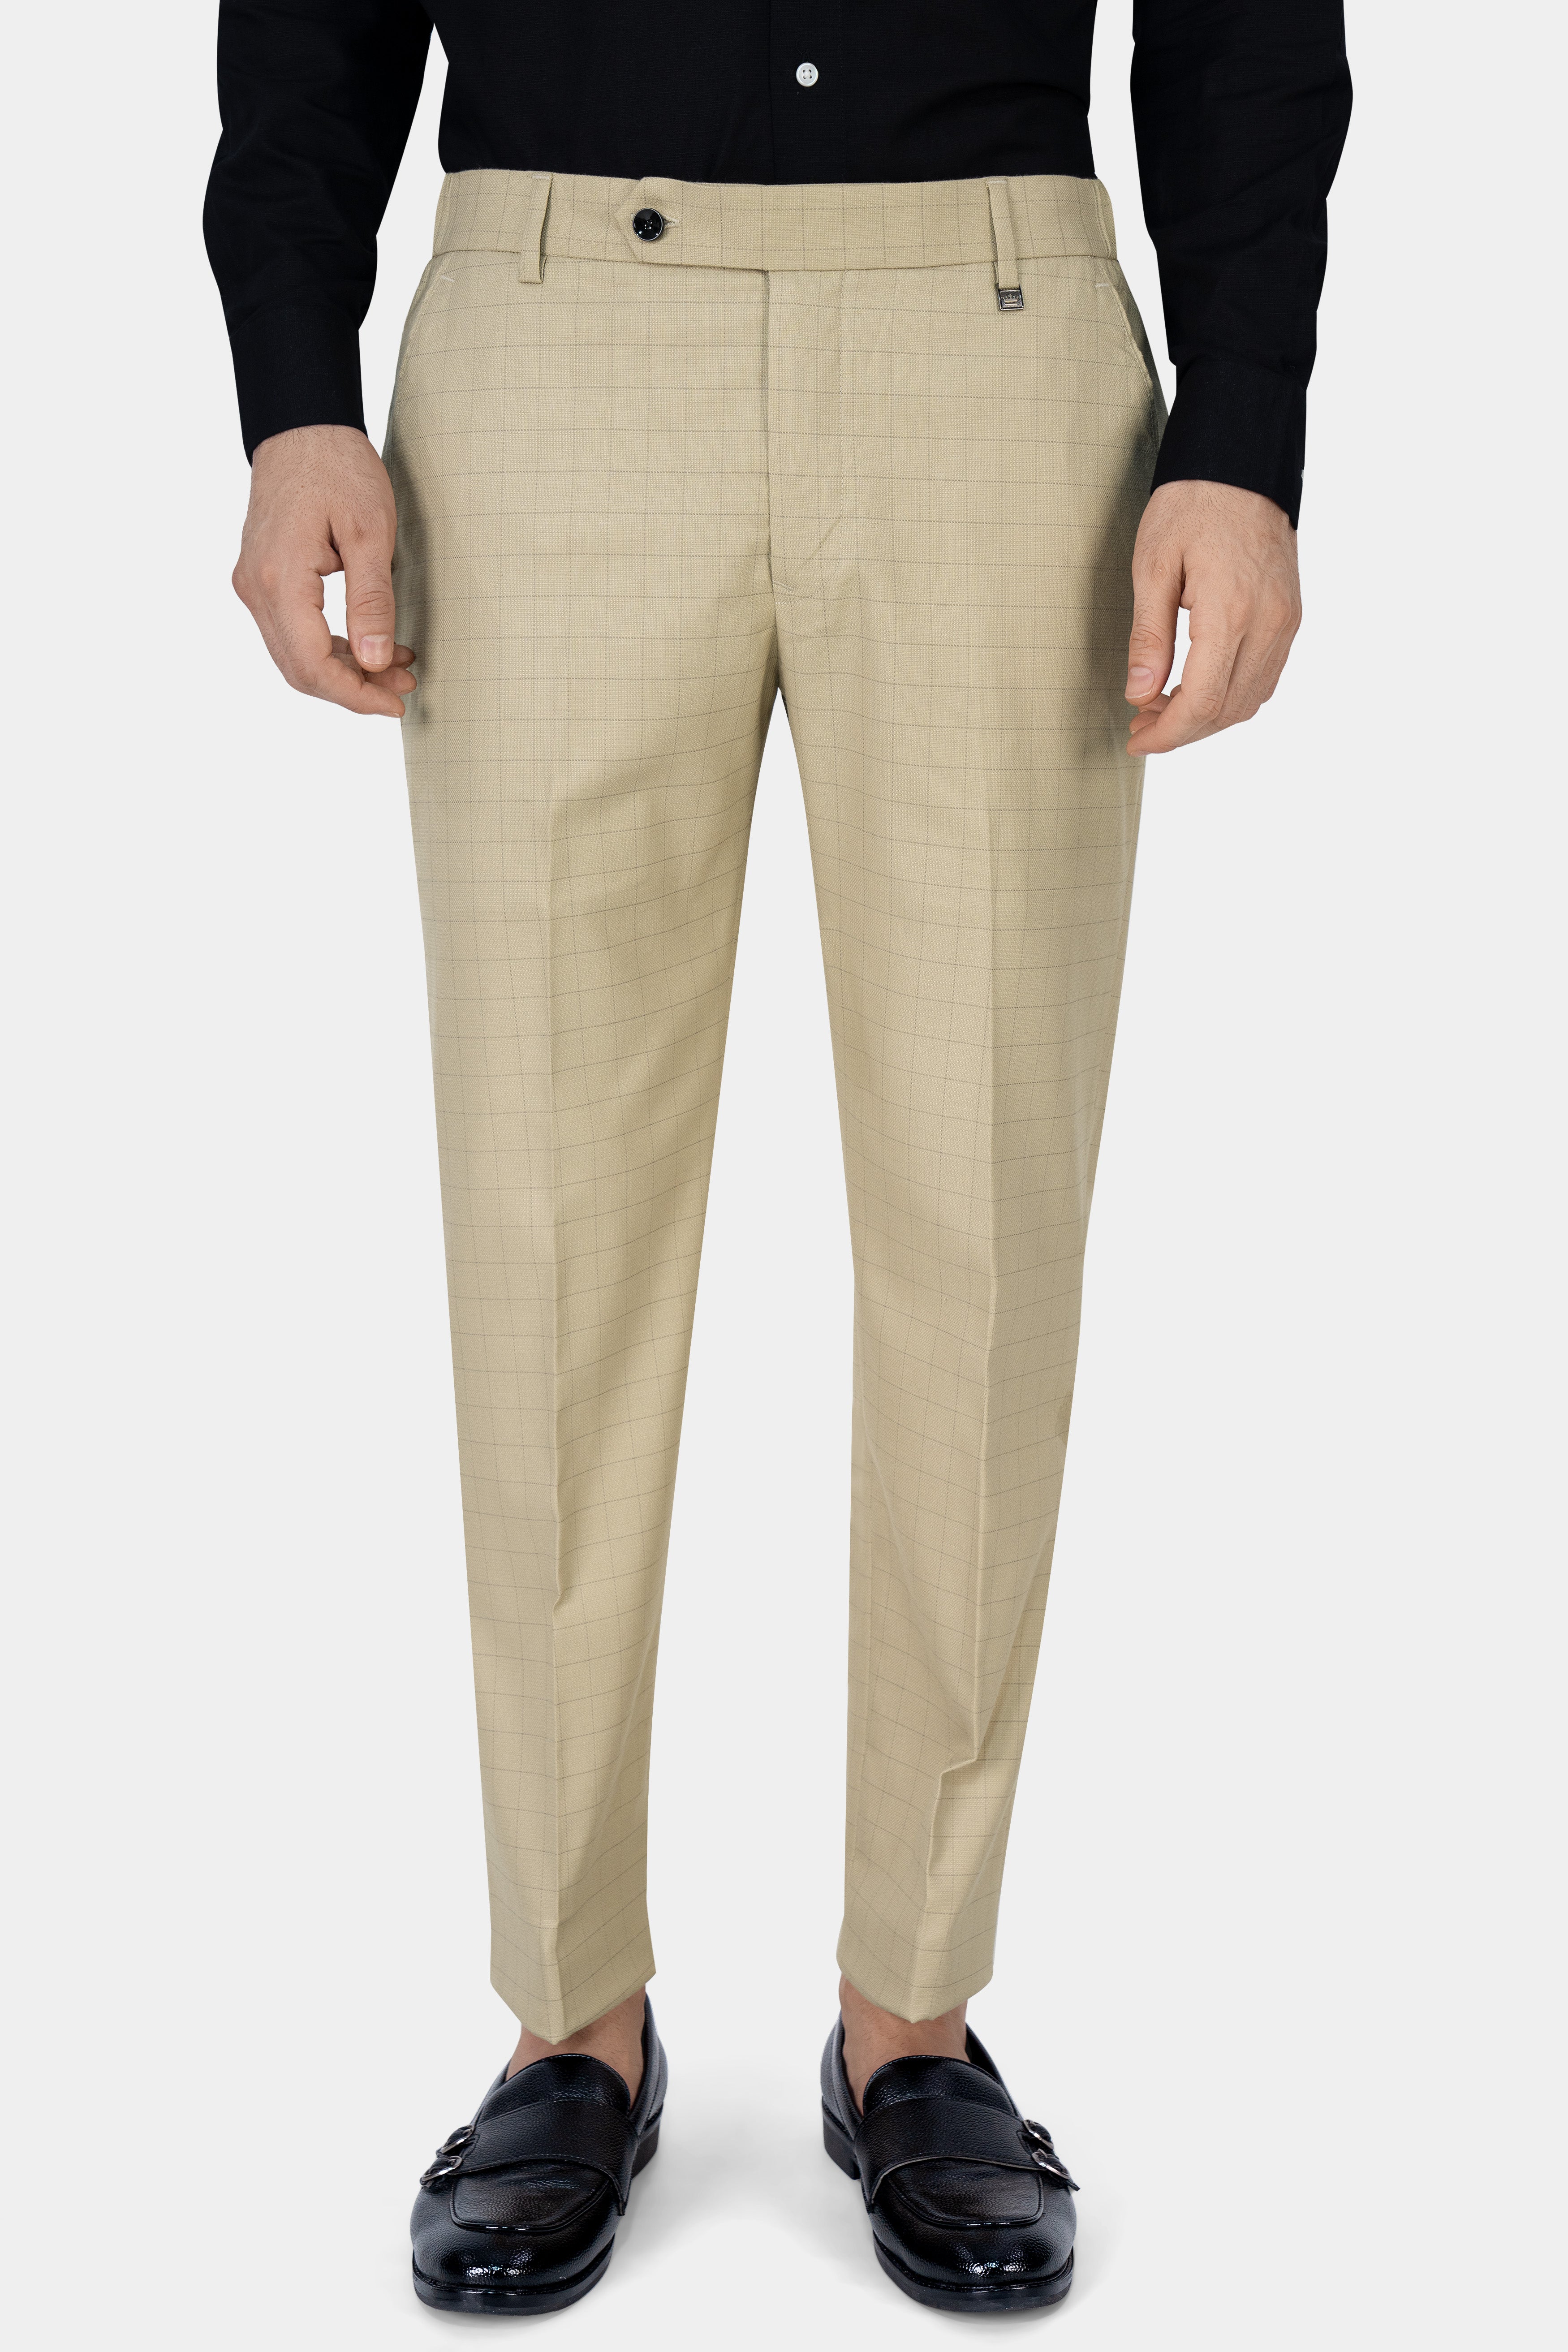 Pavlova Brown with Taupe Brown Checkered Dobby Wool Rich Cross Buttoned Bandhgala Suit ST2878-CBG-36,ST2878-CBG-38,ST2878-CBG-40,ST2878-CBG-42,ST2878-CBG-44,ST2878-CBG-46,ST2878-CBG-48,ST2878-CBG-50,ST2878-CBG-52,ST2878-CBG-54,ST2878-CBG-56,ST2878-CBG-58,ST2878-CBG-60